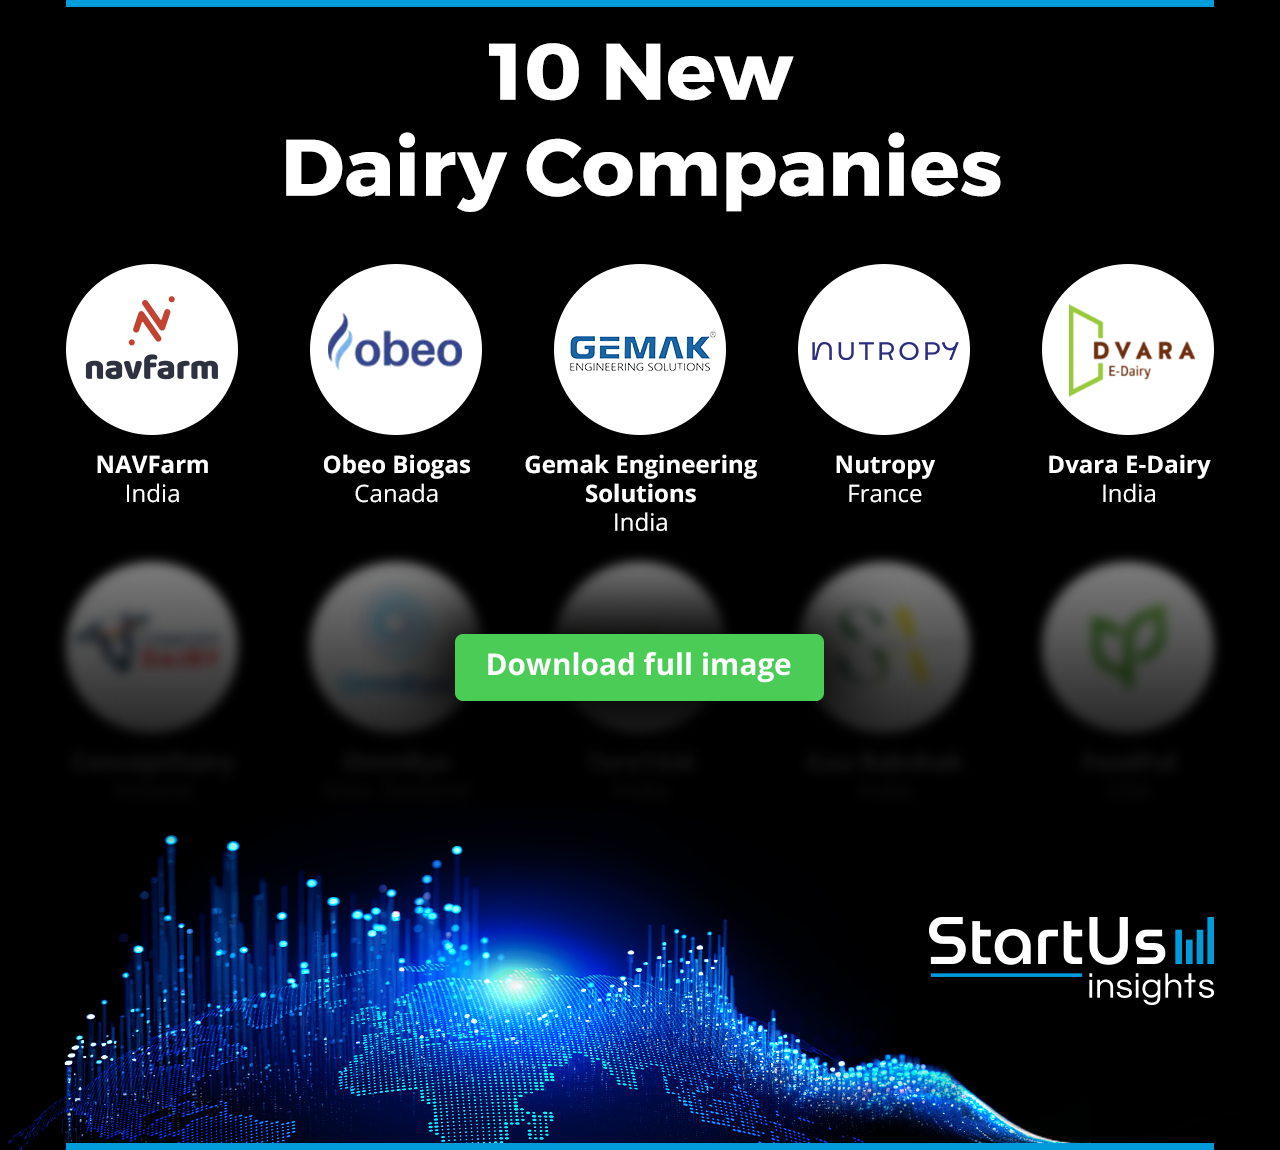 New-Dairy-Industry-Companies-Logos-Blurred-StartUs-Insights-noresize